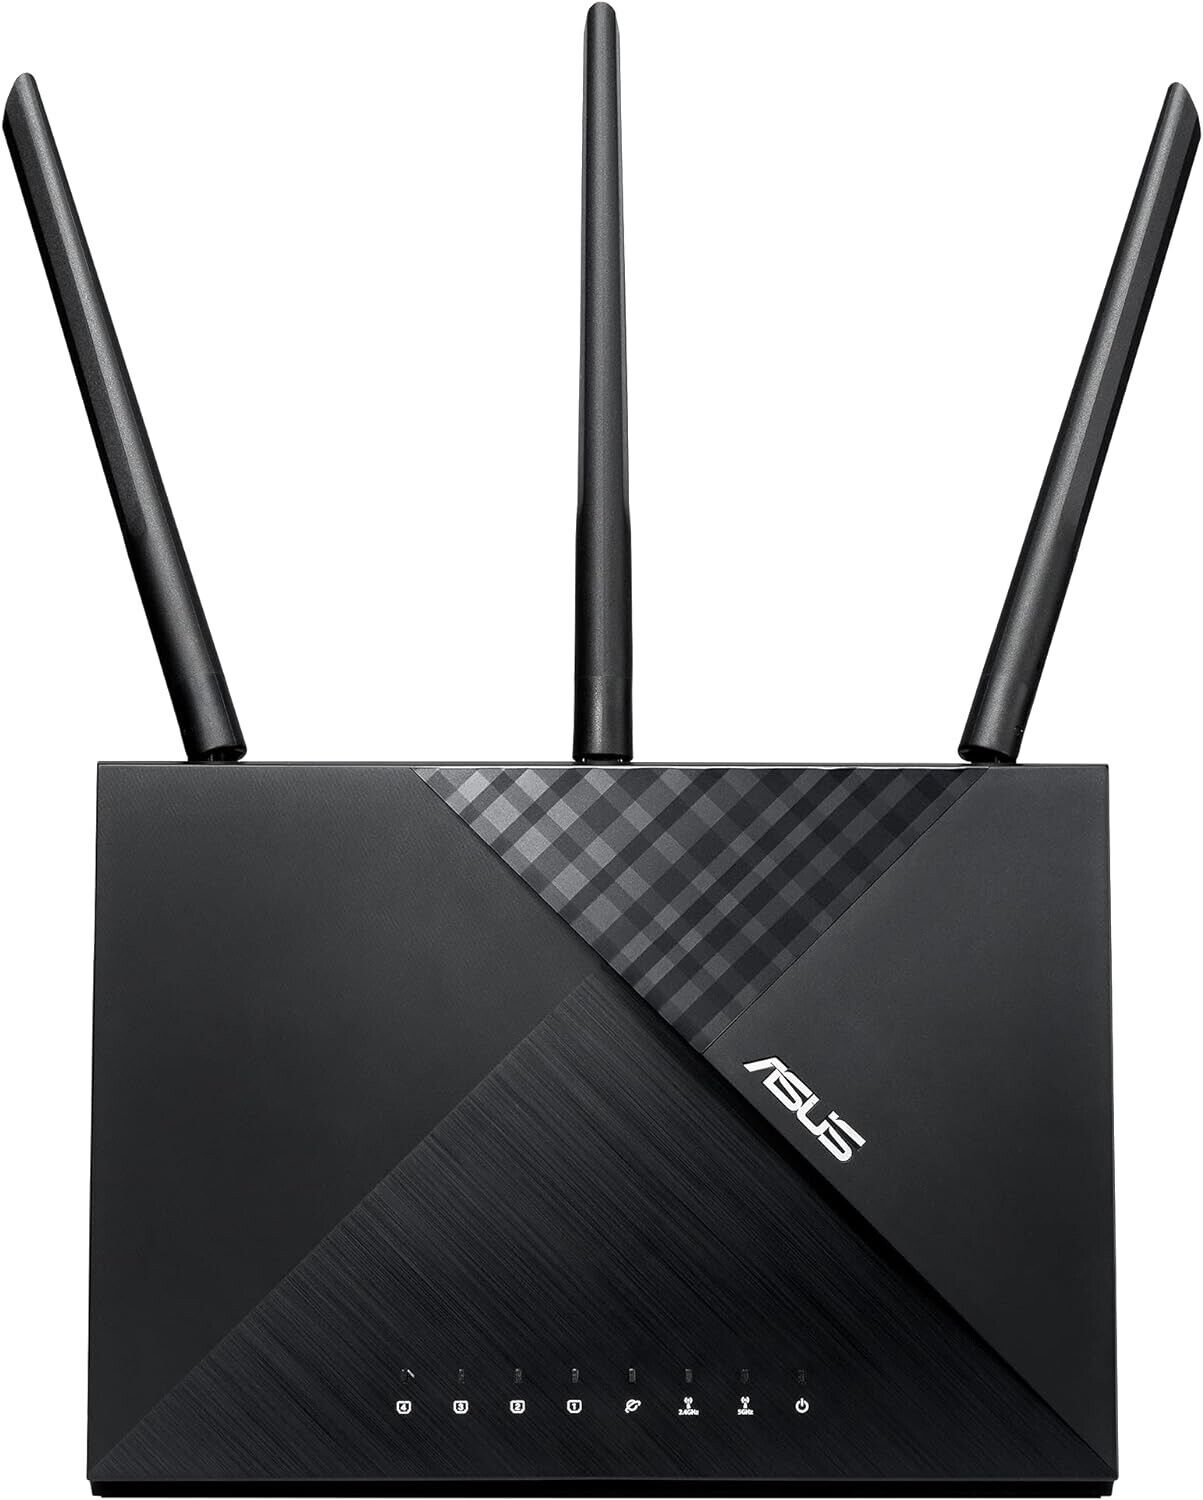 ASUS AC1750 Dual Band WiFi Router (RT-AC65) - Enhanced Speed, Stability - D4